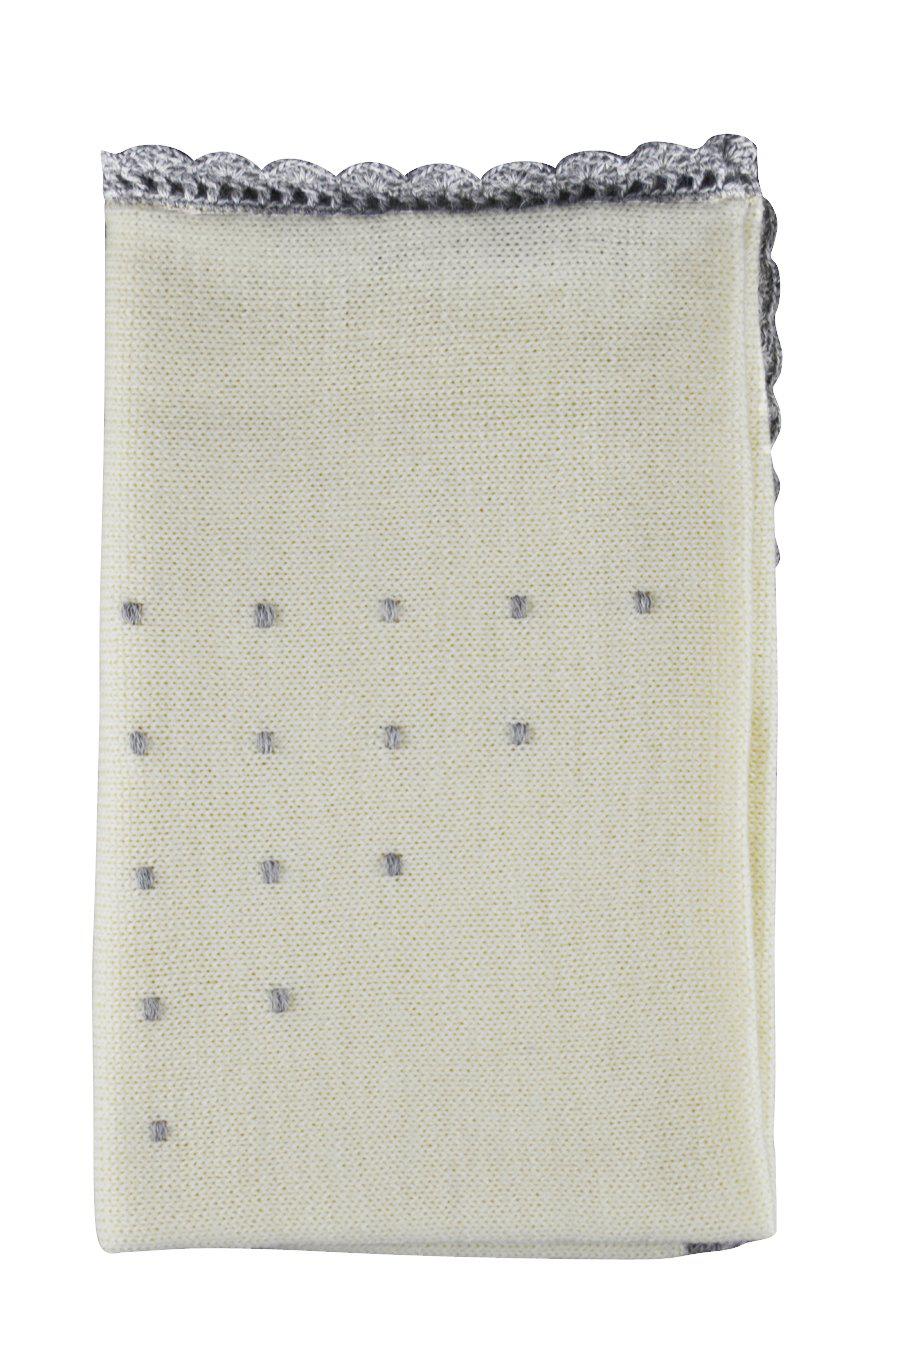 Ivory Alpaca Blanket with Grey Dots - Little Threads Inc. Children's Clothing